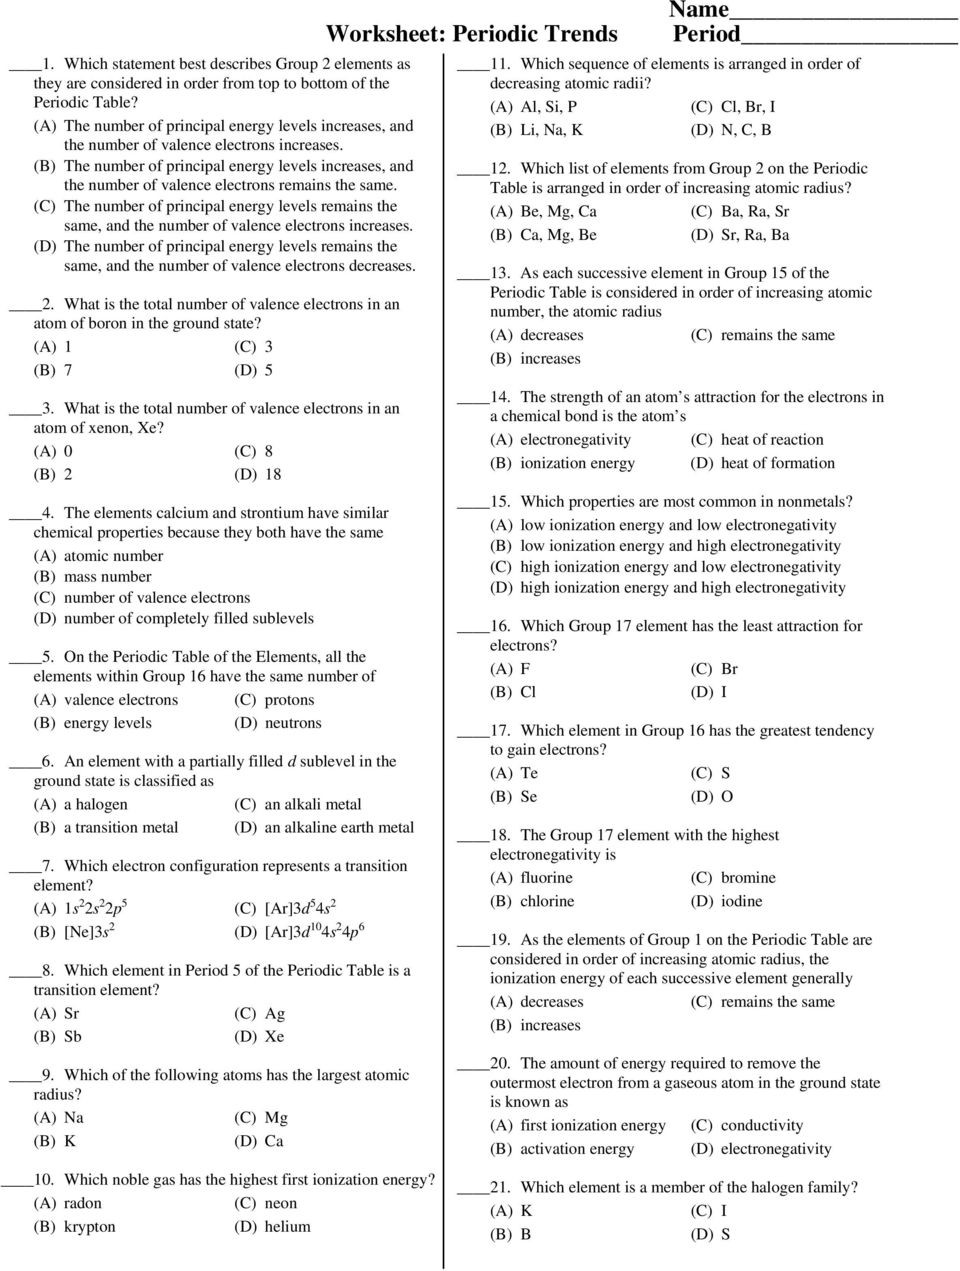 Worksheet Periodic Trends Answers Name Worksheet Periodic Trends 11 which Sequence Of